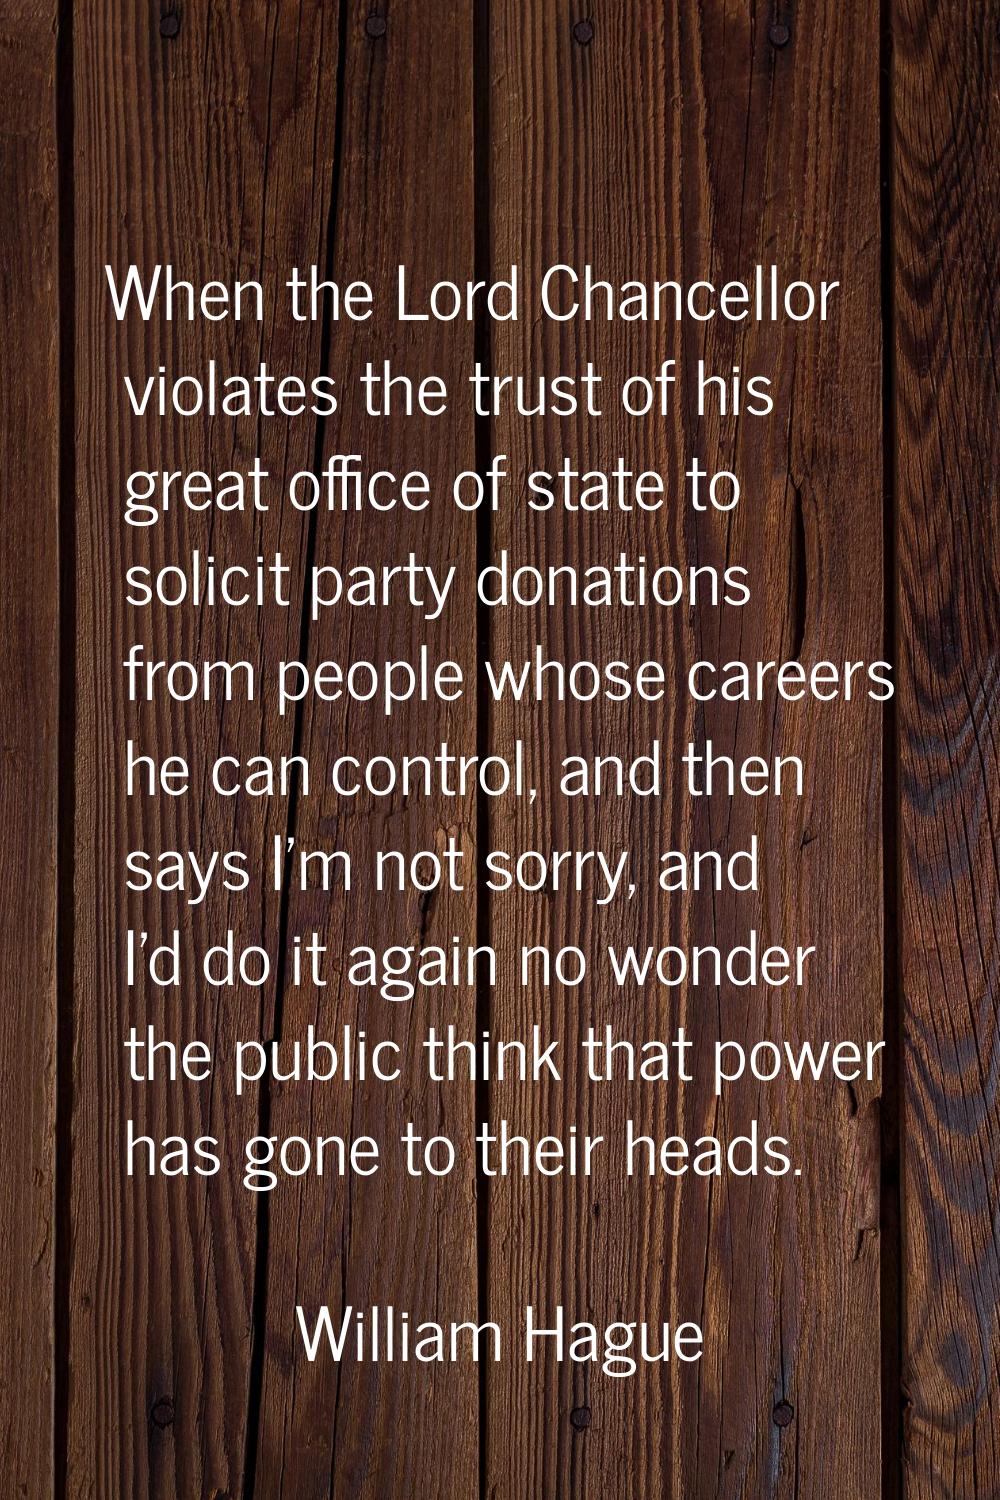 When the Lord Chancellor violates the trust of his great office of state to solicit party donations